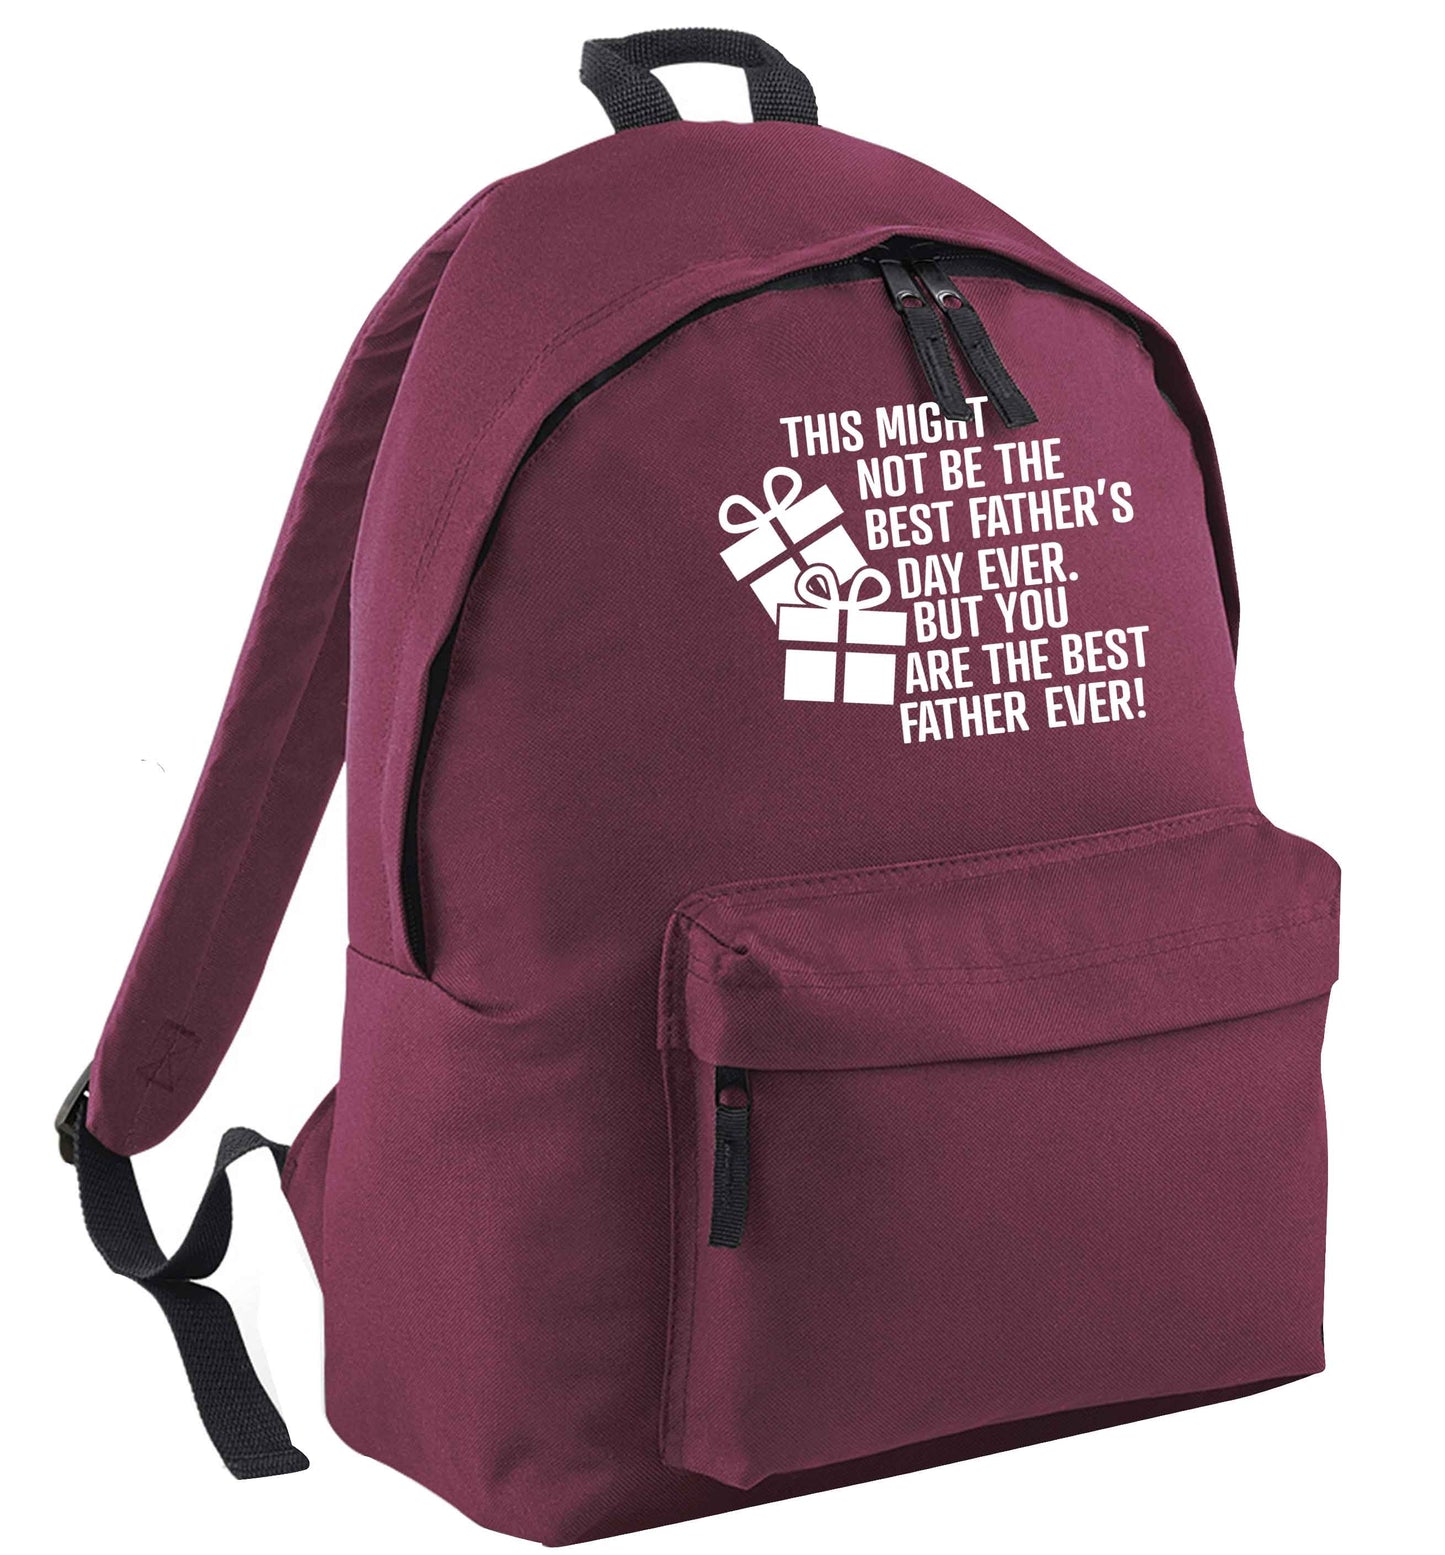 It might not be the best Father's Day ever but you are the best father ever! maroon adults backpack